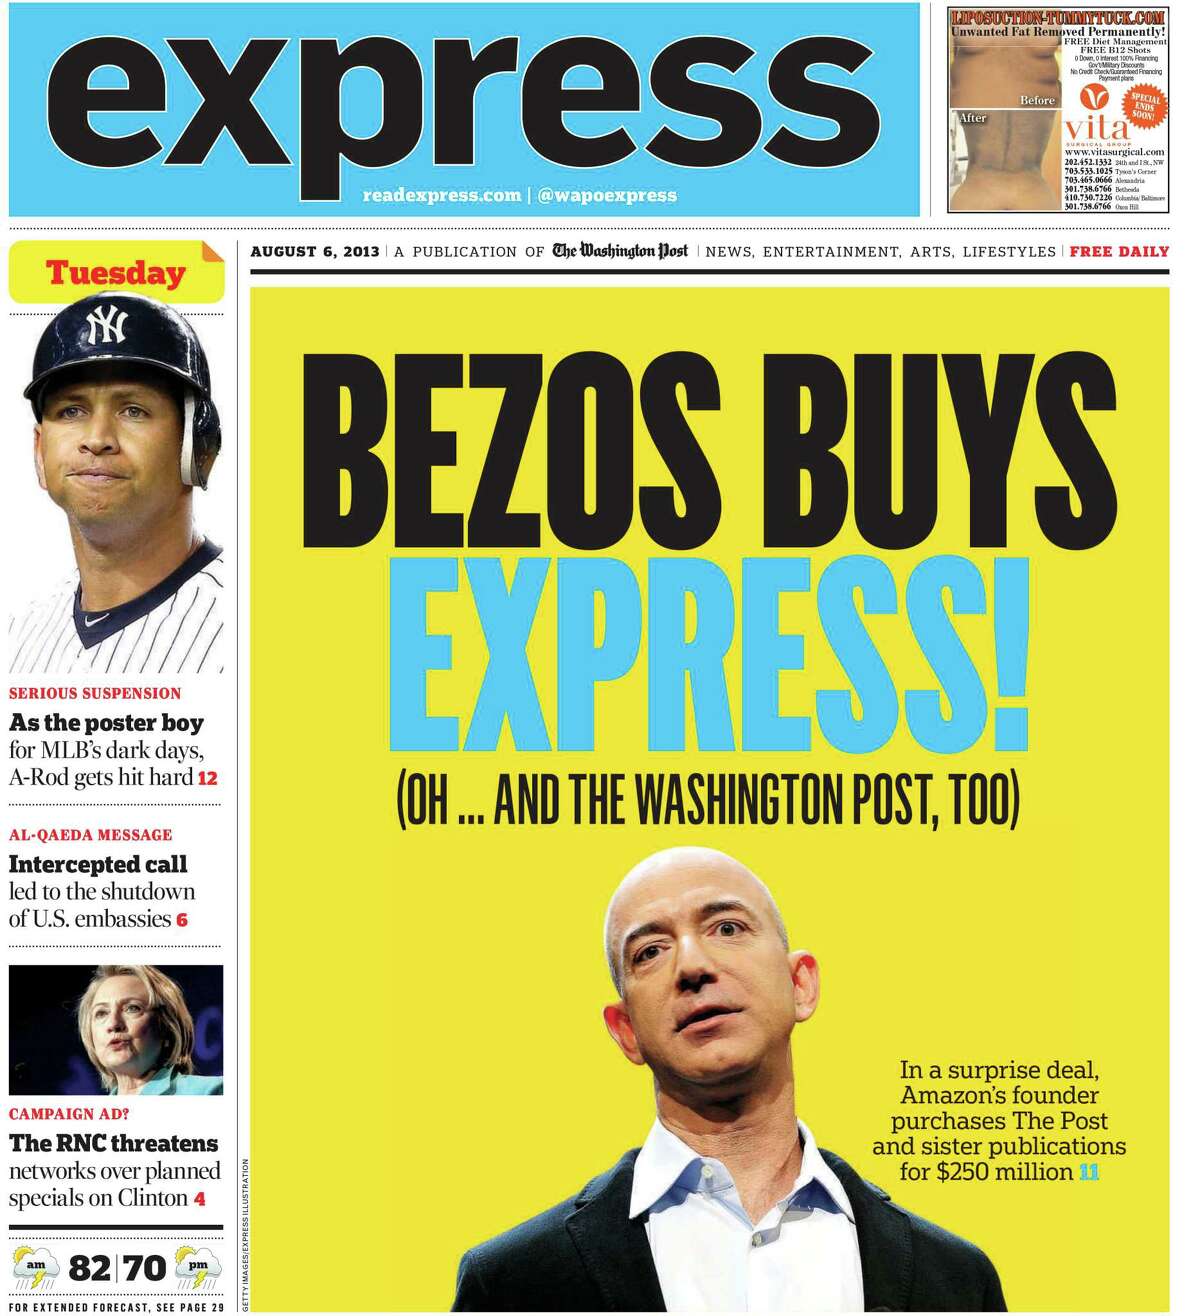 Express, the free newspaper published weekdays by The Washington Post for subway riders and other commuters, is shutting down, ending 16 years of publication.